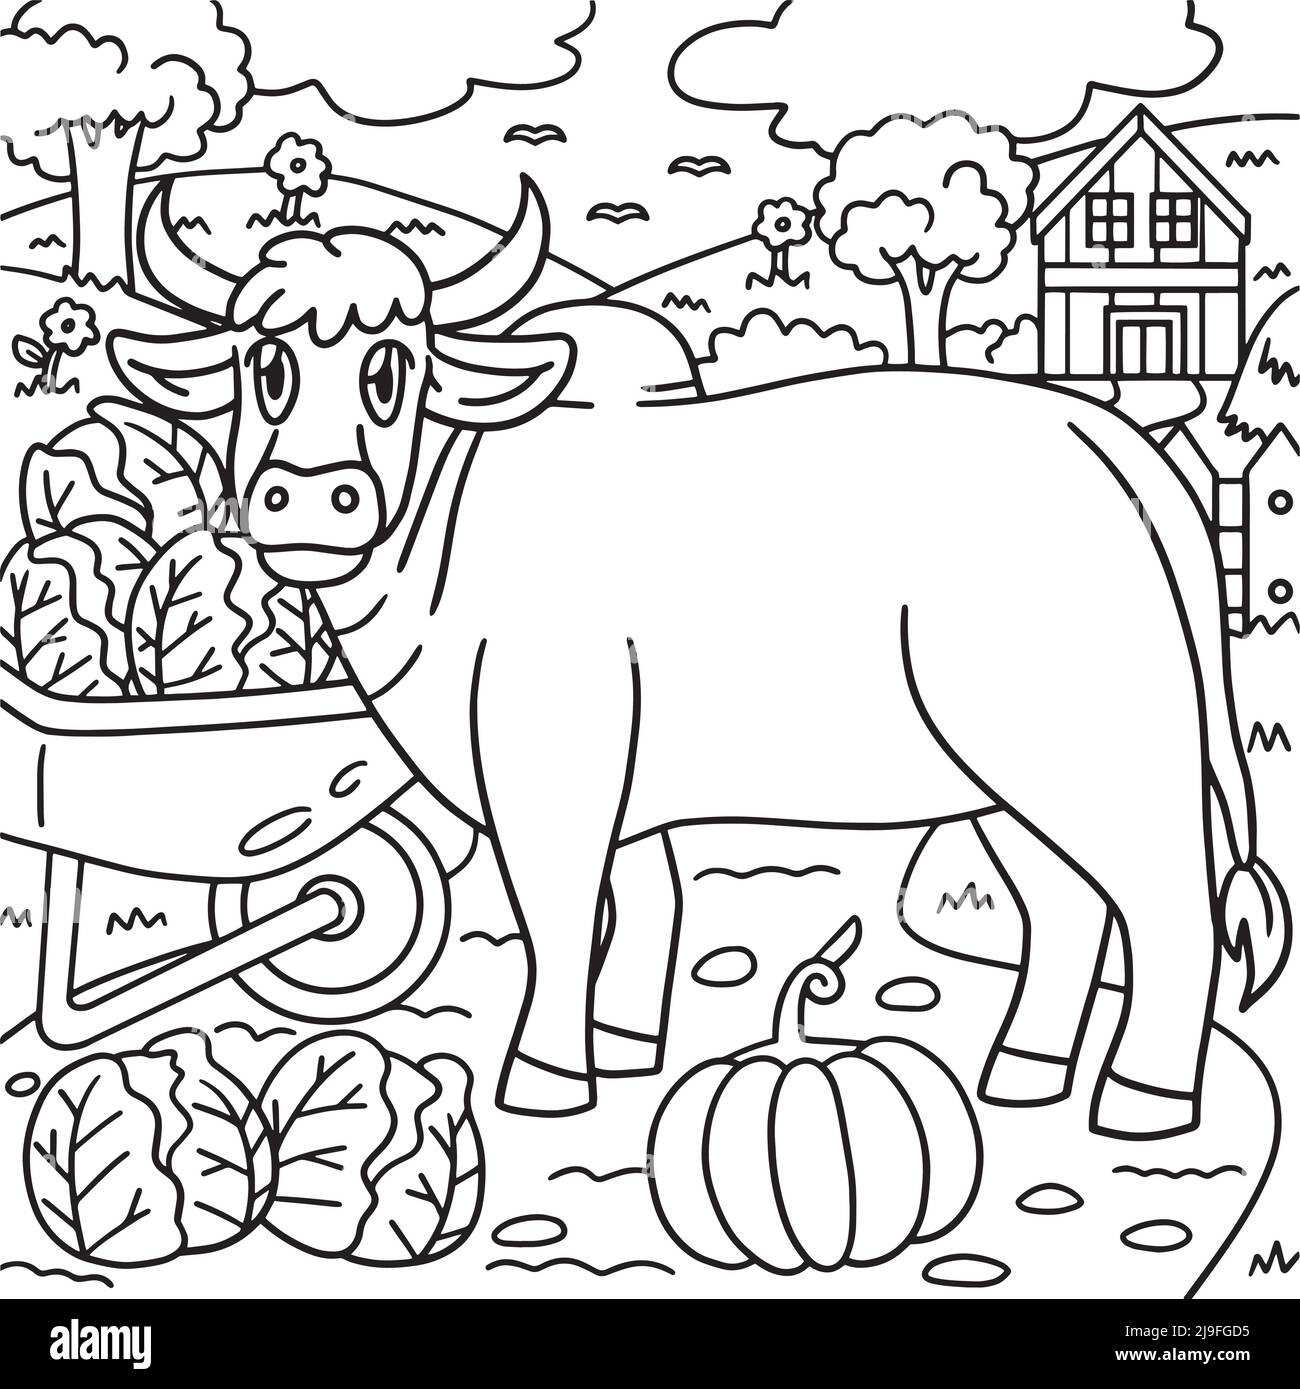 Ox Coloring Page for Kids Stock Vector